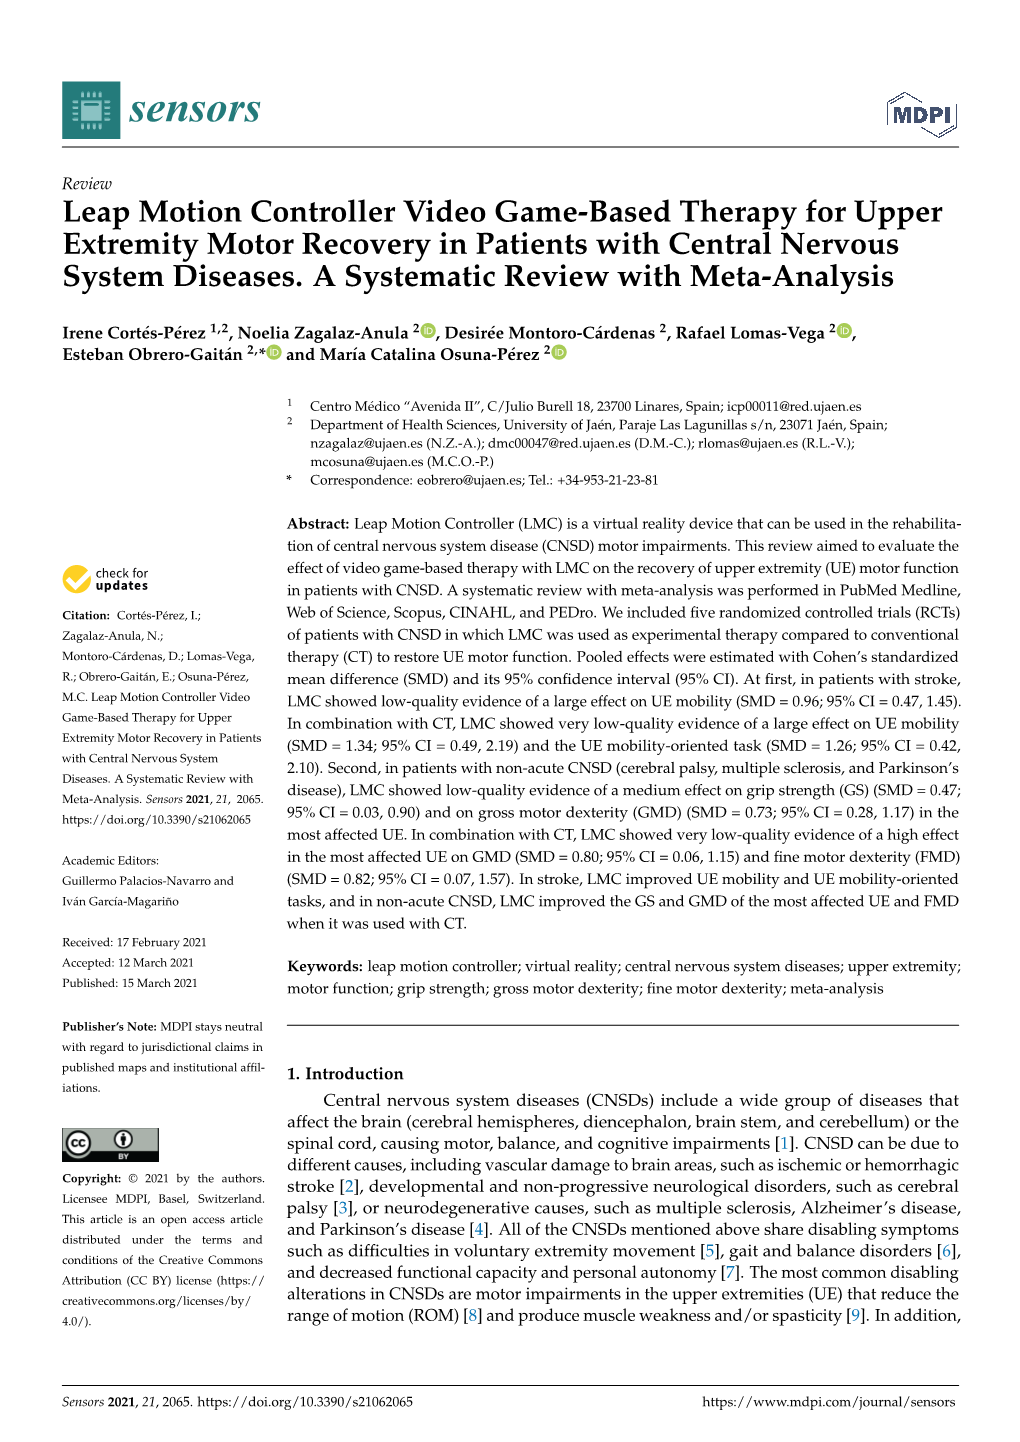 Leap Motion Controller Video Game-Based Therapy for Upper Extremity Motor Recovery in Patients with Central Nervous System Diseases